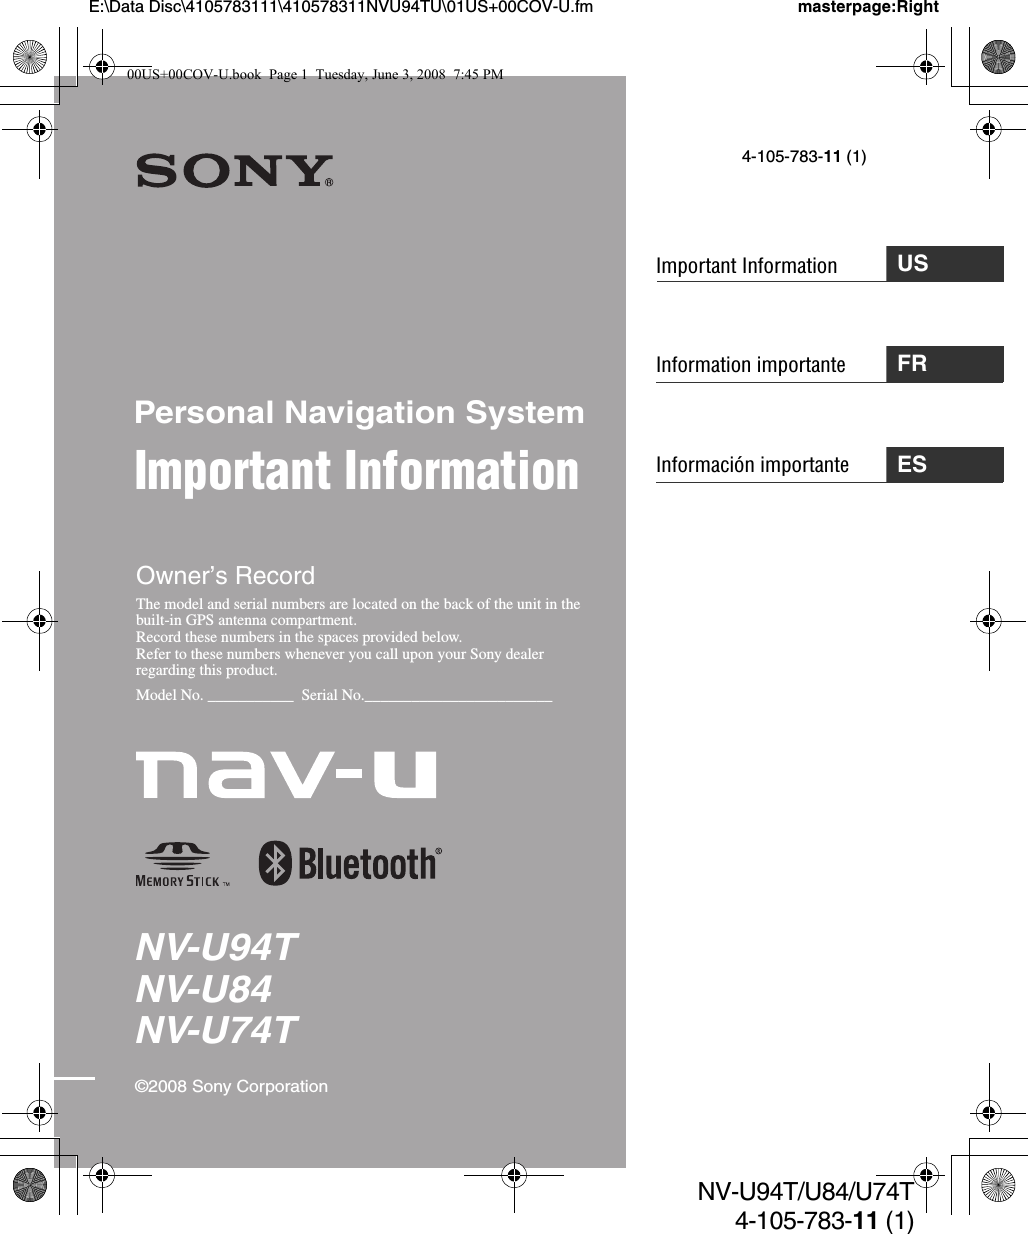 Information importanteNV-U94TNV-U84NV-U74TPersonal Navigation SystemImportant Information©2008 Sony CorporationOwner’s RecordThe model and serial numbers are located on the back of the unit in the built-in GPS antenna compartment.Record these numbers in the spaces provided below.Refer to these numbers whenever you call upon your Sony dealer regarding this product.Model No. ___________  Serial No.________________________masterpage:RightNV-U94T/U84/U74T4-105-783-11 (1)USImportant Information4-105-783-11 (1)FRInformación importante ESE:\Data Disc\4105783111\410578311NVU94TU\01US+00COV-U.fm00US+00COV-U.book  Page 1  Tuesday, June 3, 2008  7:45 PM